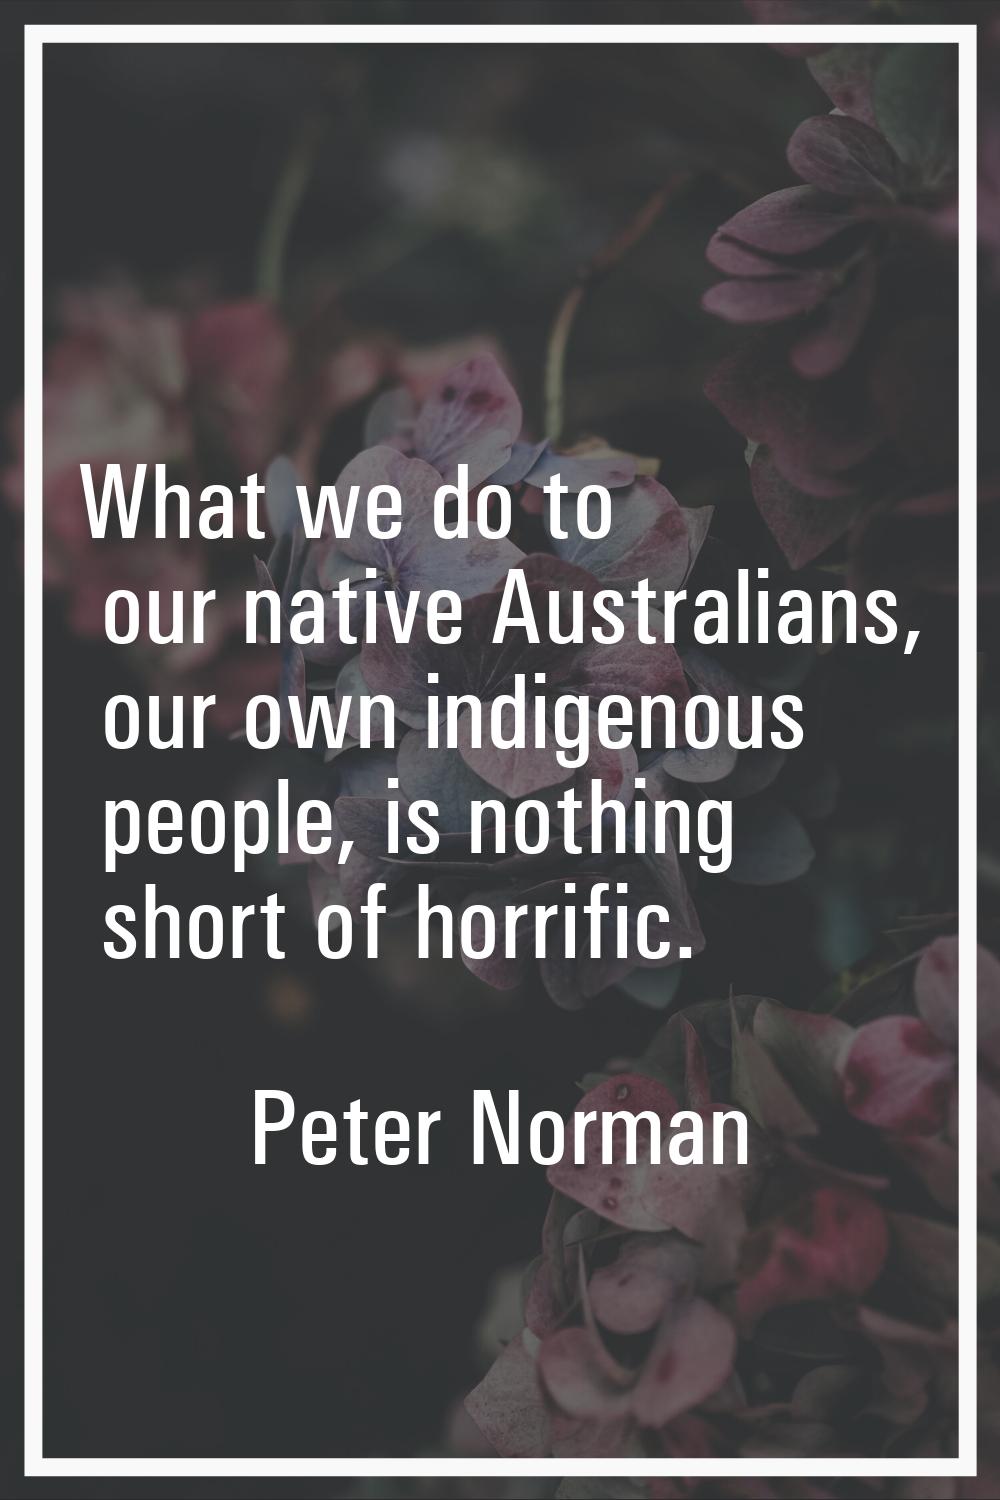 What we do to our native Australians, our own indigenous people, is nothing short of horrific.